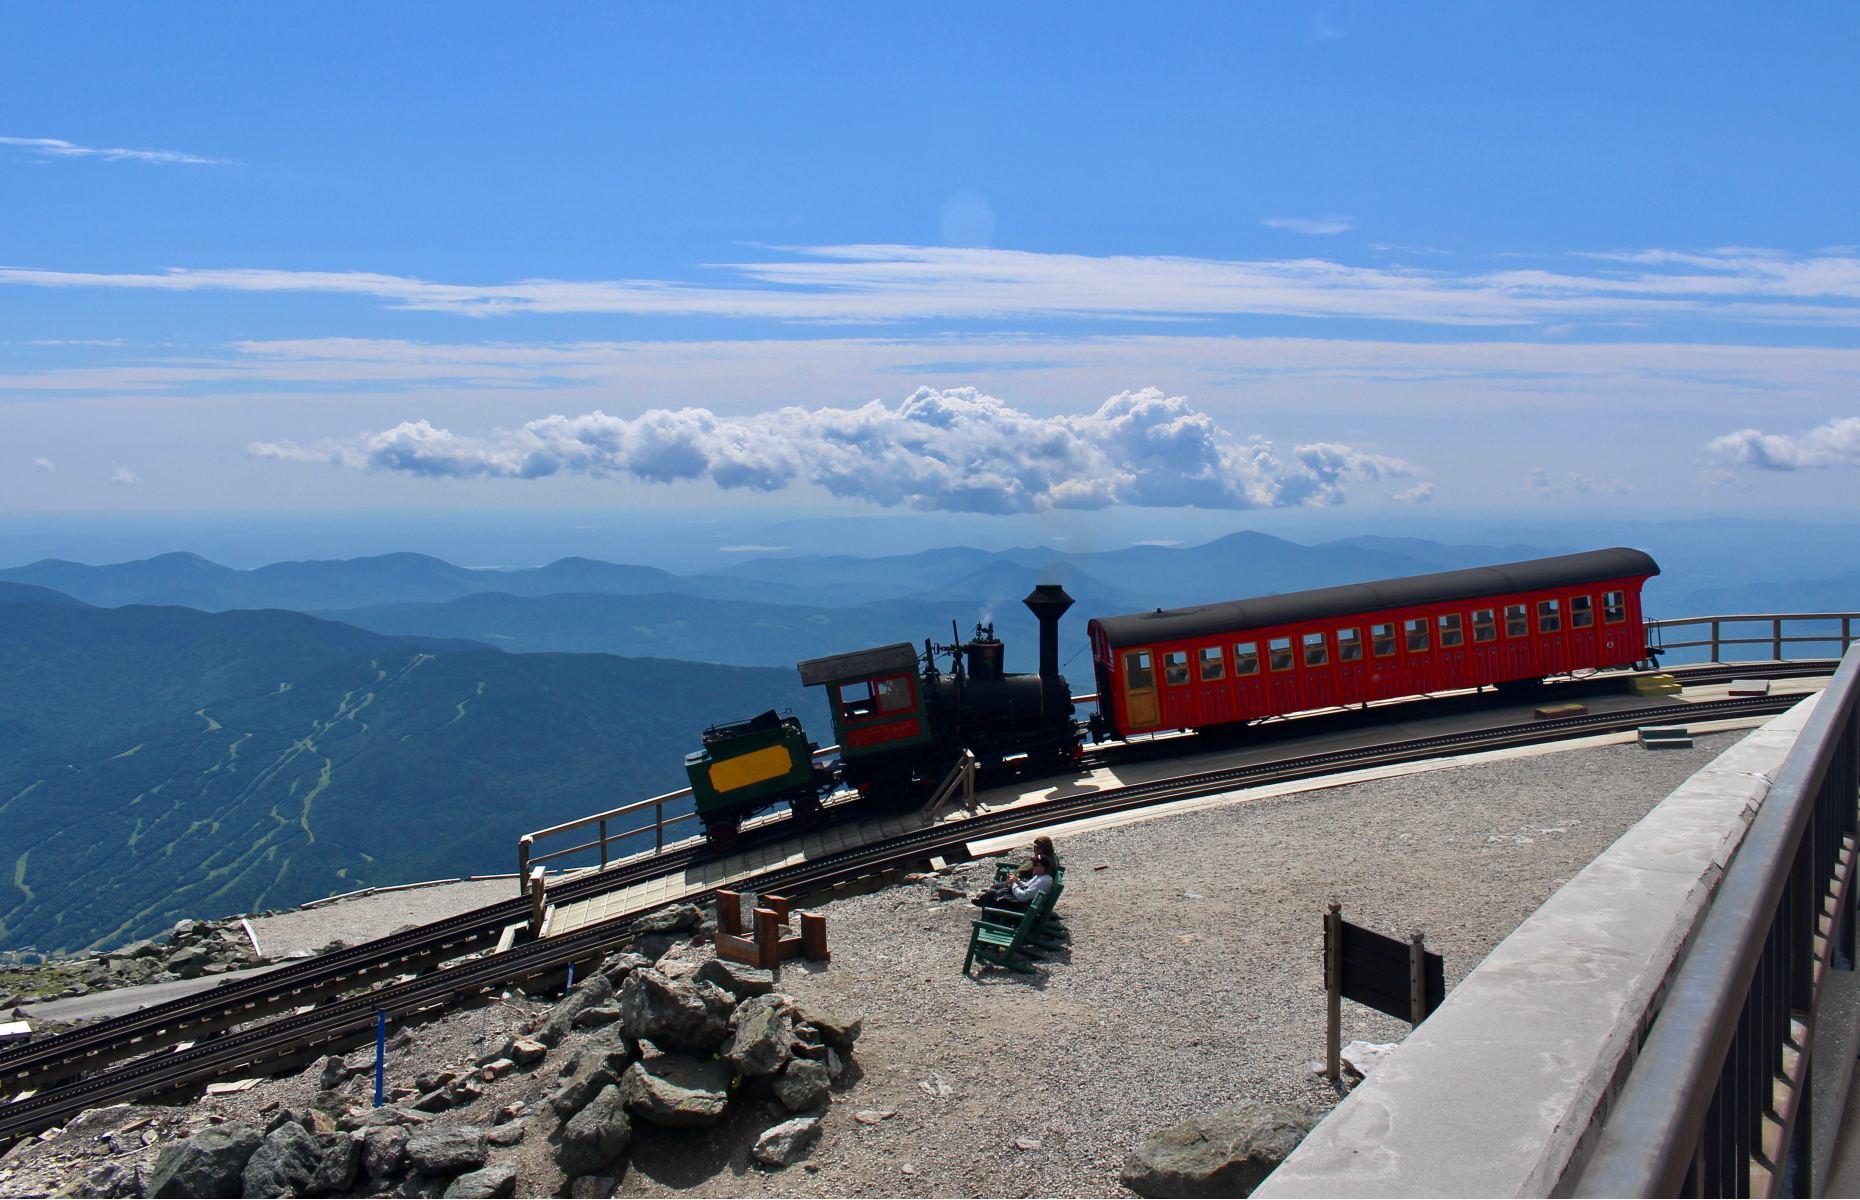 <p>The world's first mountain-climbing cog railway, this little locomotive journeys to the peak of the highest mountain in the northeastern United States. Rising above Bretton Woods and New Hampshire's White Mountains, the National Historic Engineering Landmark operates three-hour round-trips daily from May to October.</p>  <p>If you’re lucky enough to dodge the mountain's notorious weather (it can snow on Mount Washington even in summer), the 360-degree views from the summit can extend all the way to the Atlantic Ocean.</p>